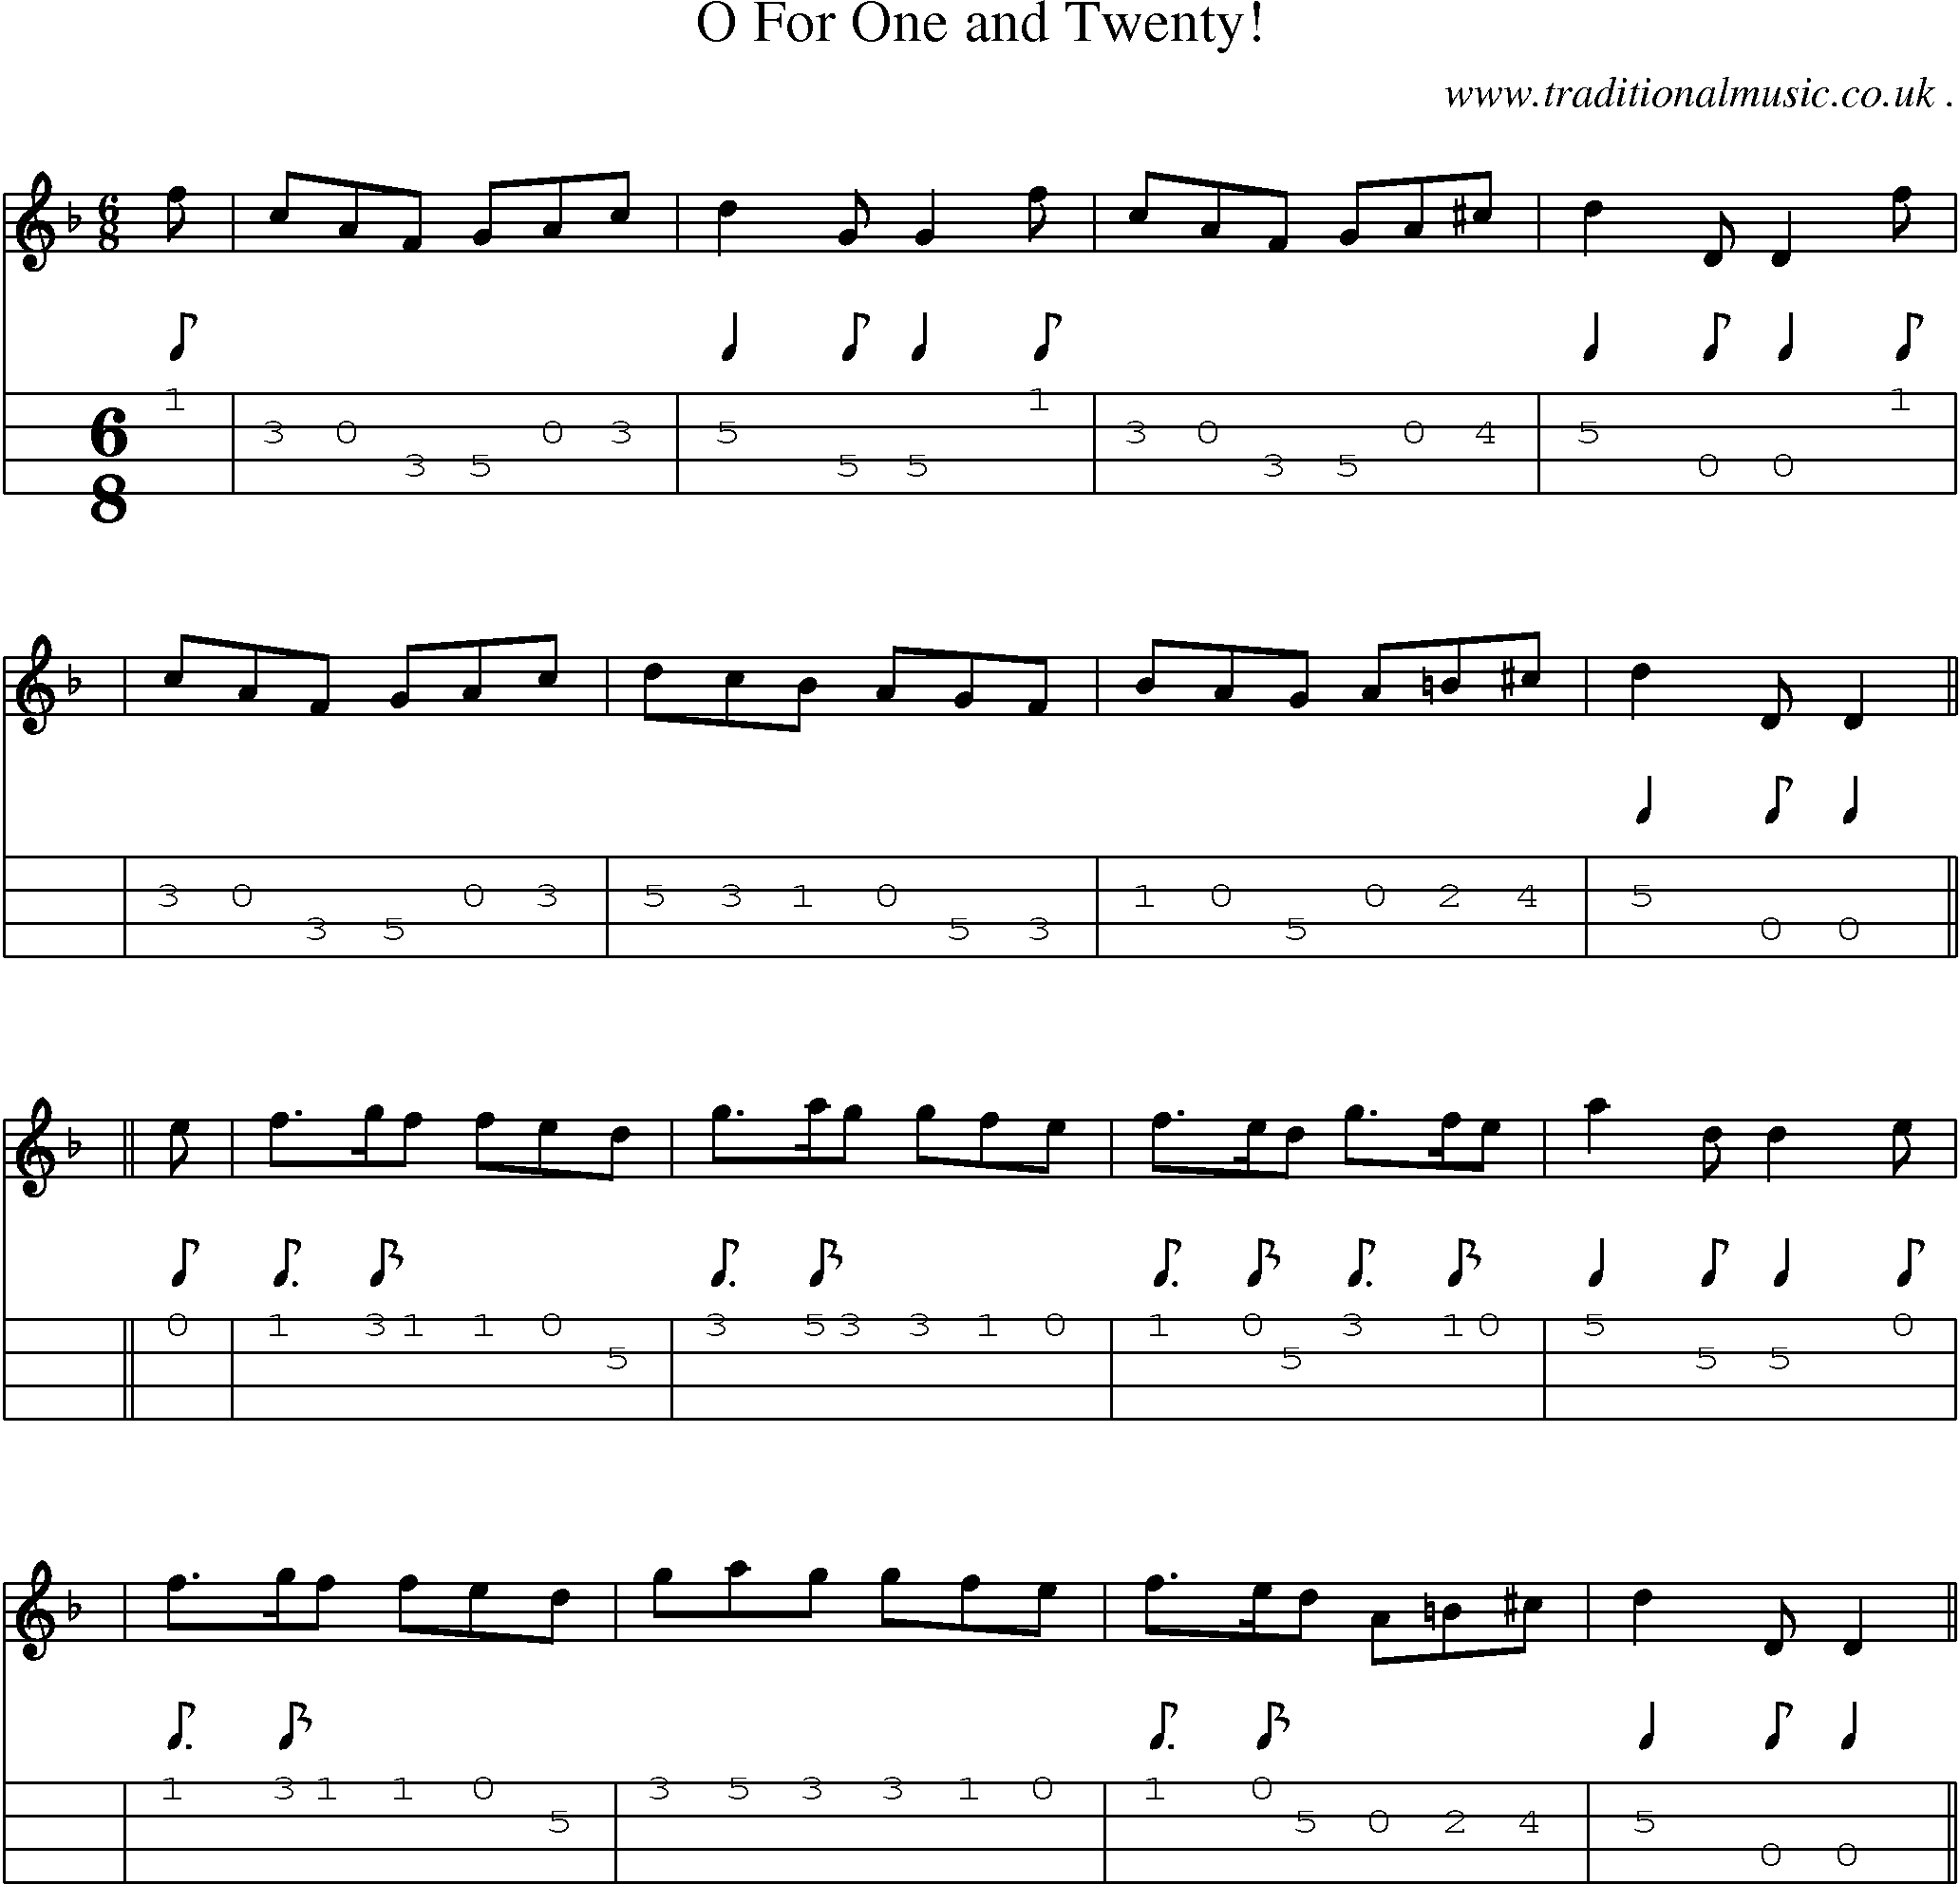 Sheet-music  score, Chords and Mandolin Tabs for O For One And Twenty!